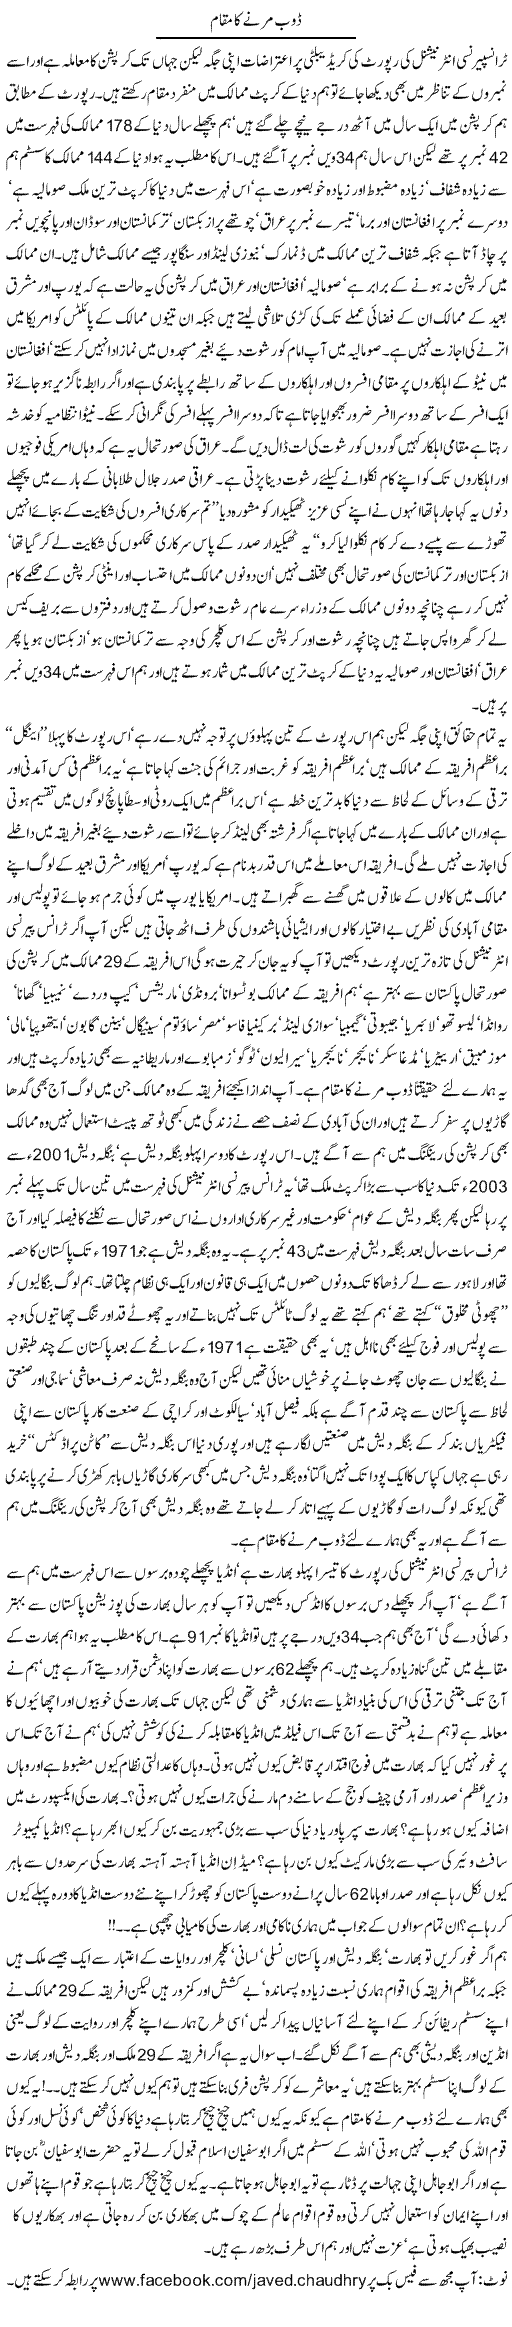 Die by Drowning Express Column Javed Chaudhry 29 October 2010